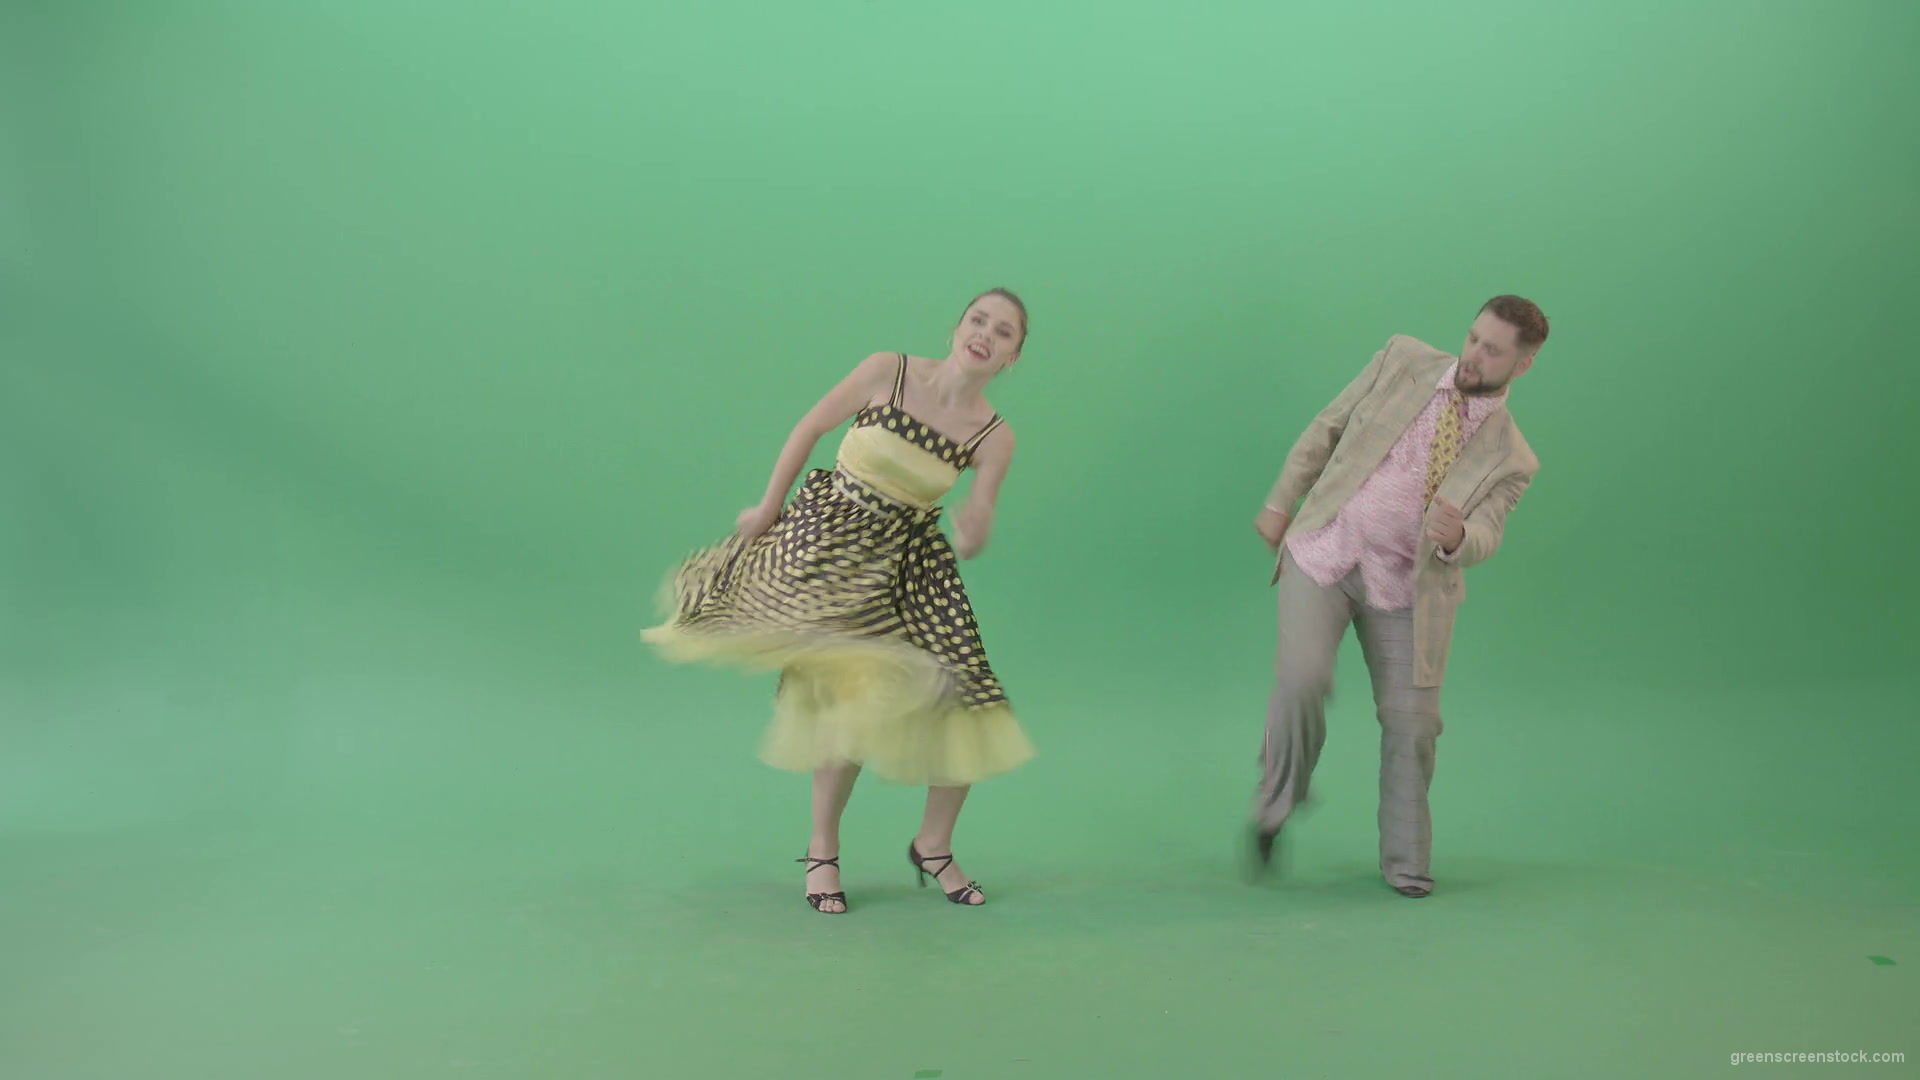 Happy-Man-and-woman-dancing-Boogie-woogie-moves-and-rock-and-roll-over-Green-Screen-4K-Video-Footage-1920_009 Green Screen Stock